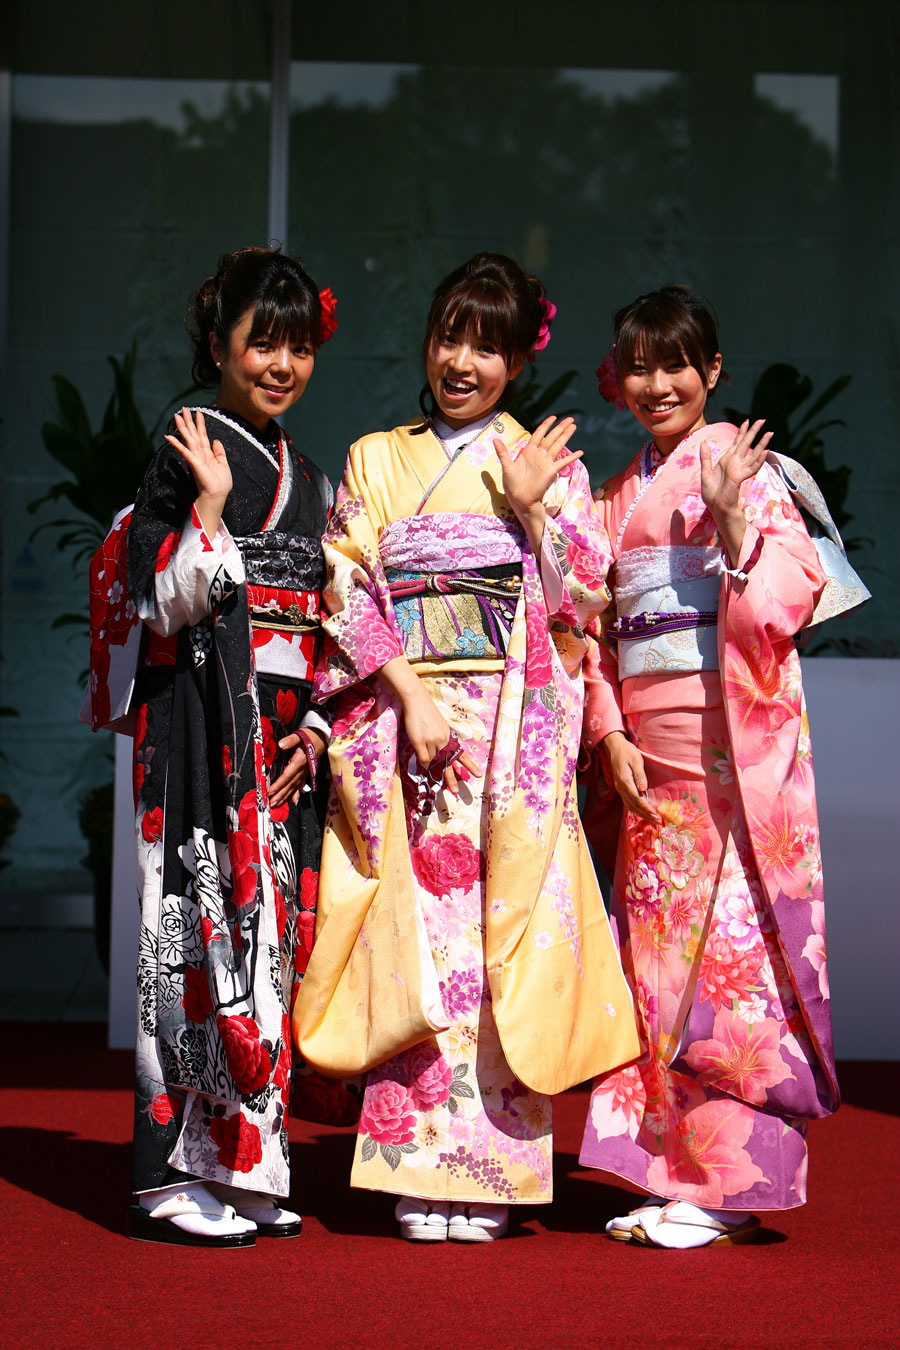 Girls in traditional dress in the paddock